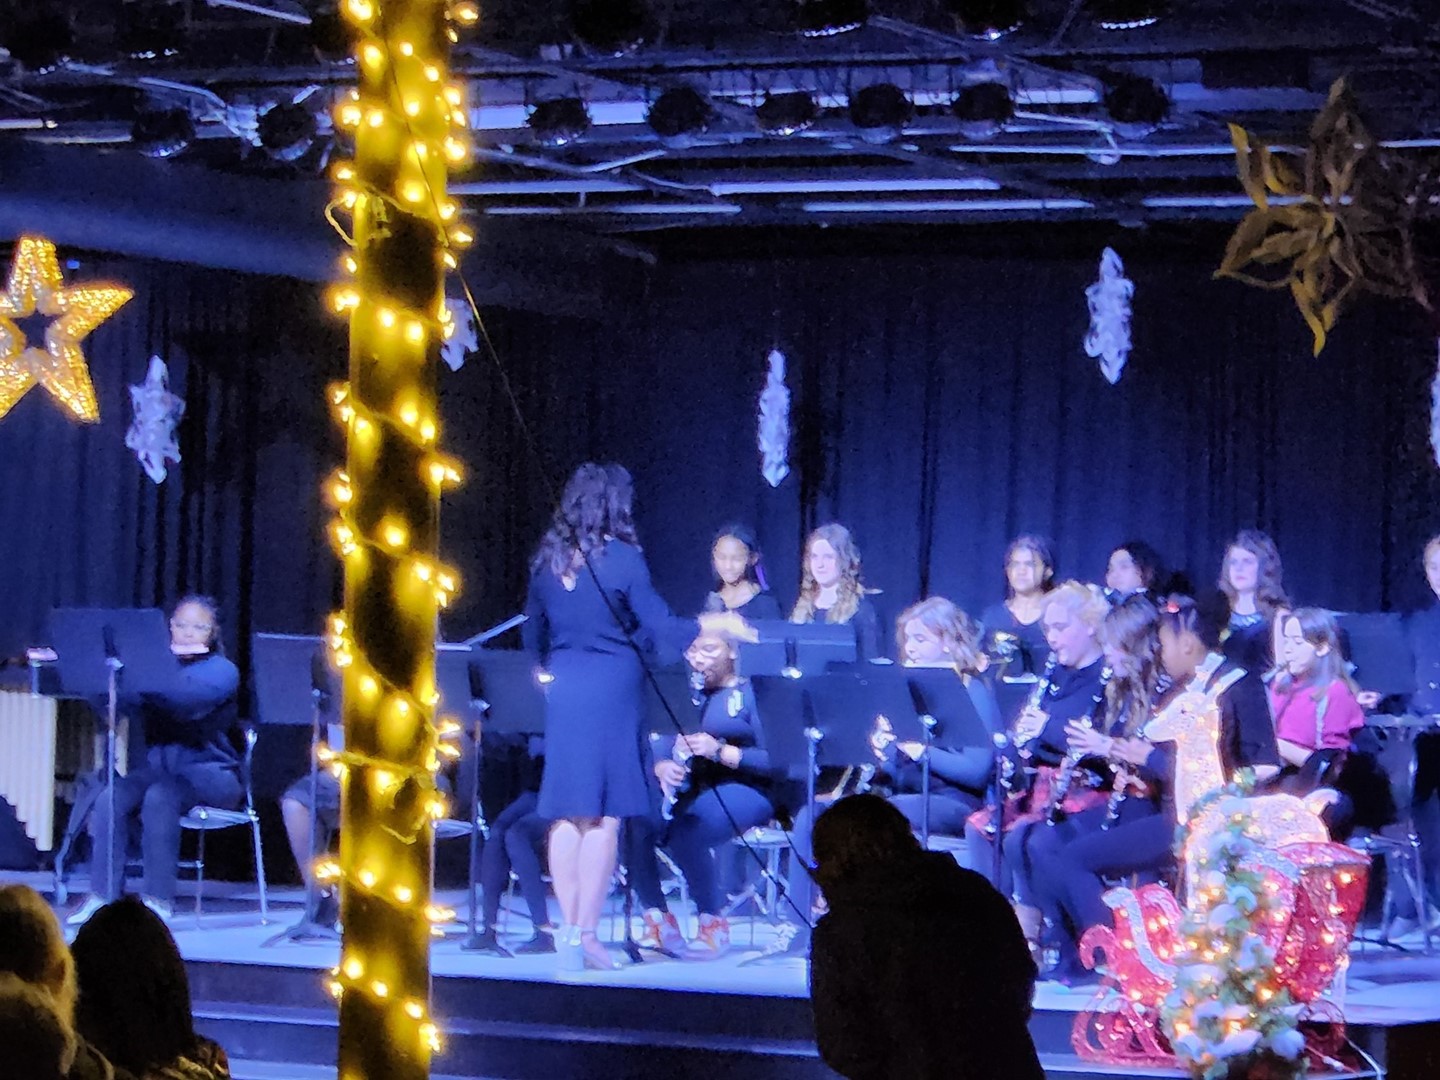 Band Performance at The Fireside Christmas